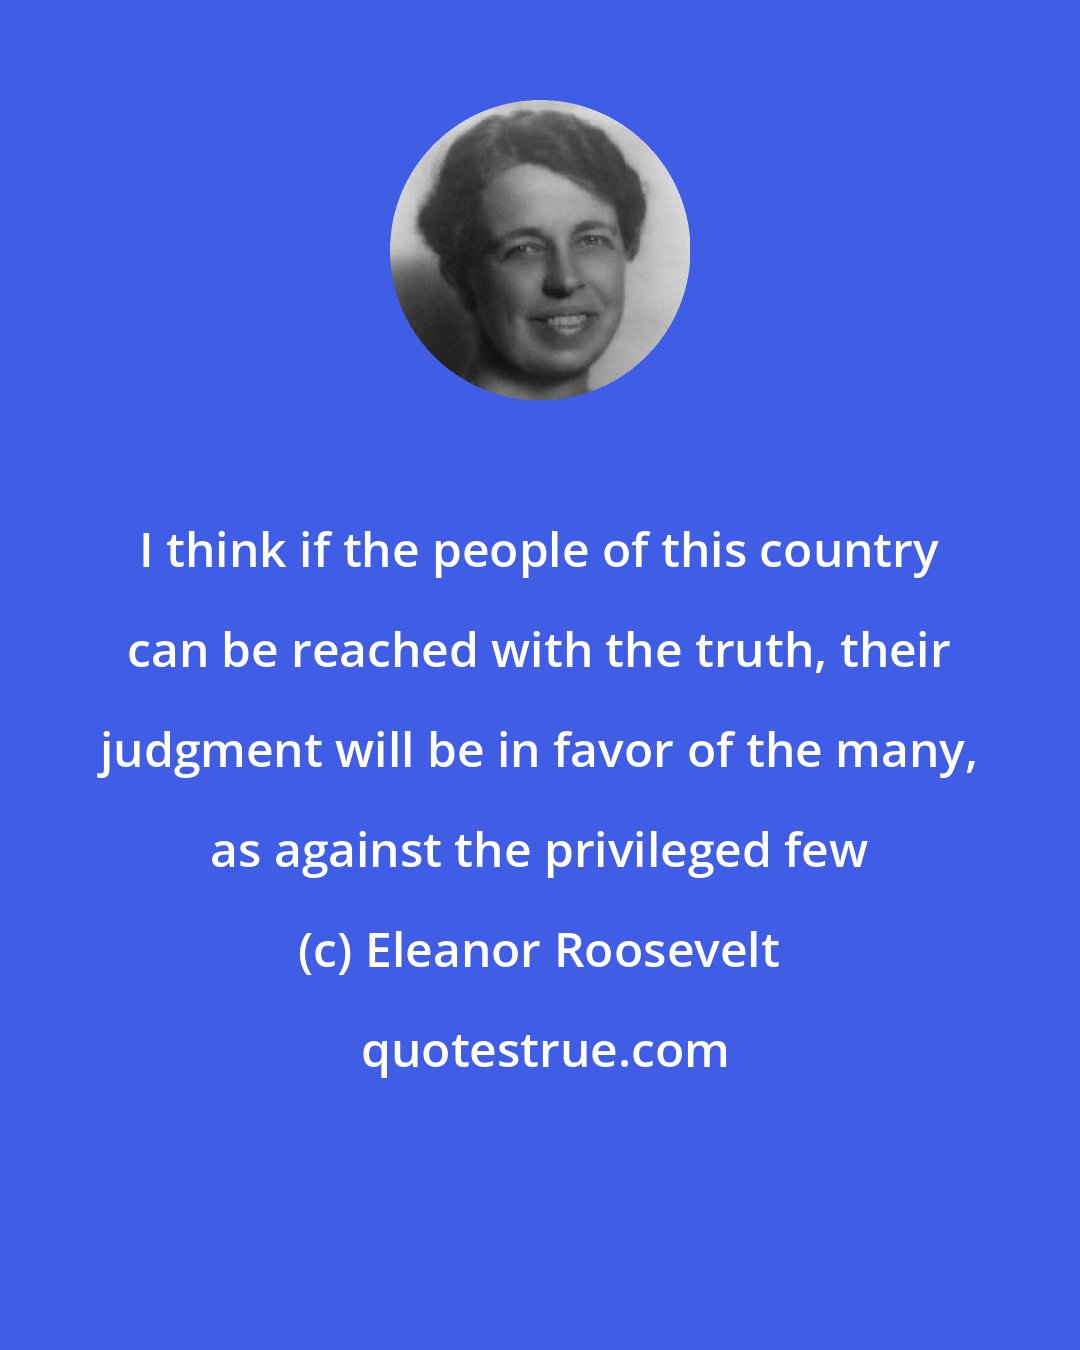 Eleanor Roosevelt: I think if the people of this country can be reached with the truth, their judgment will be in favor of the many, as against the privileged few